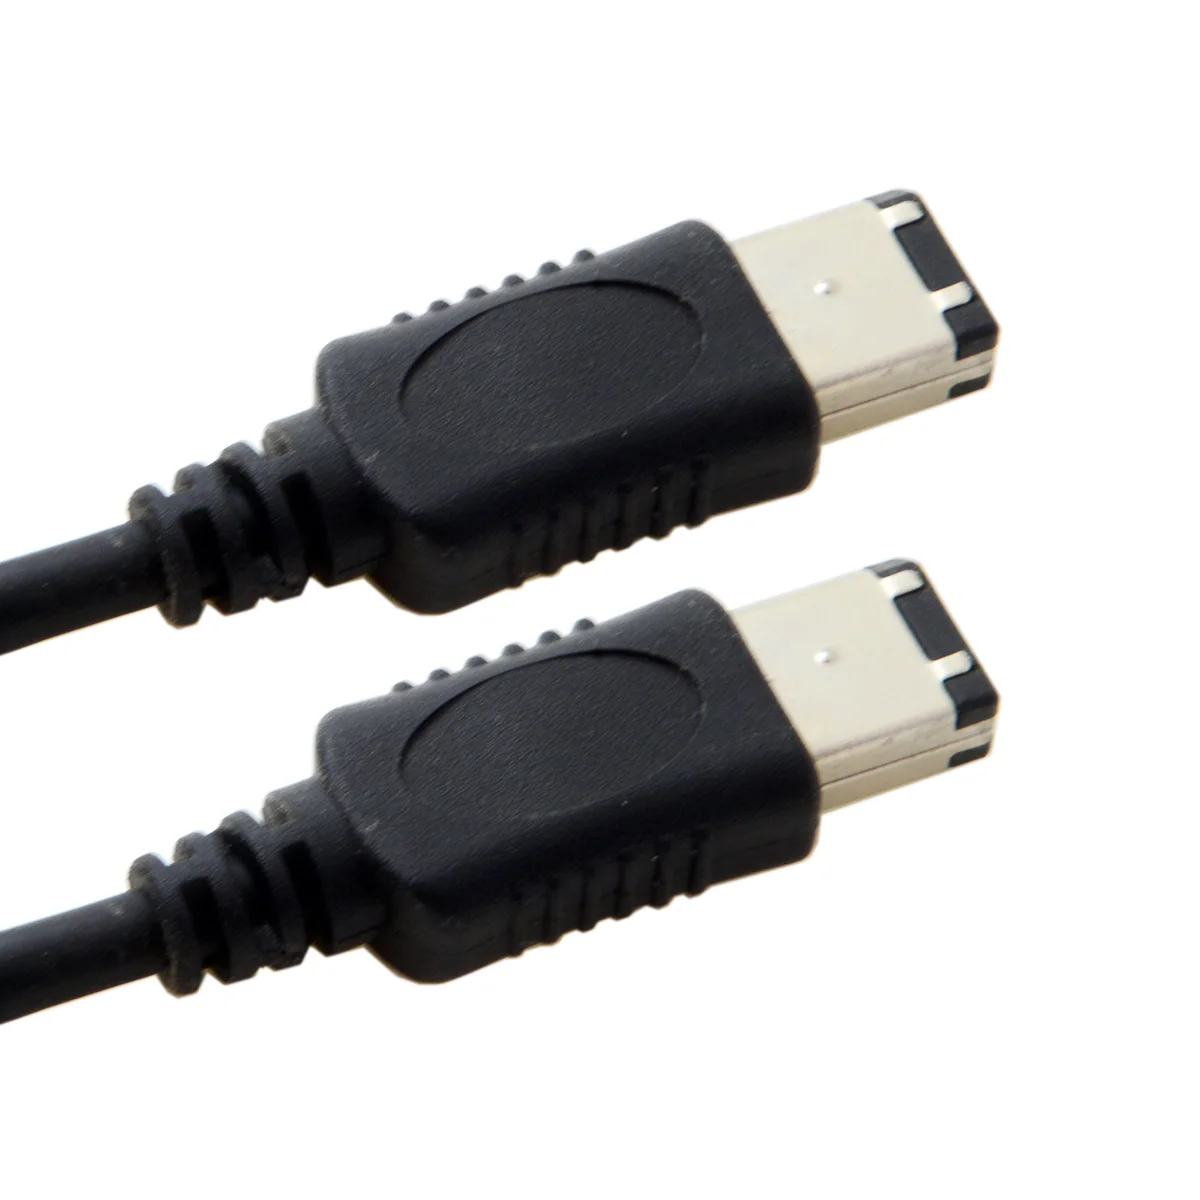 6PIN FireWire 400 CY 6 PIN FireWire 400 6-6 ilink Cable IEEE 1394 1.8m Black 